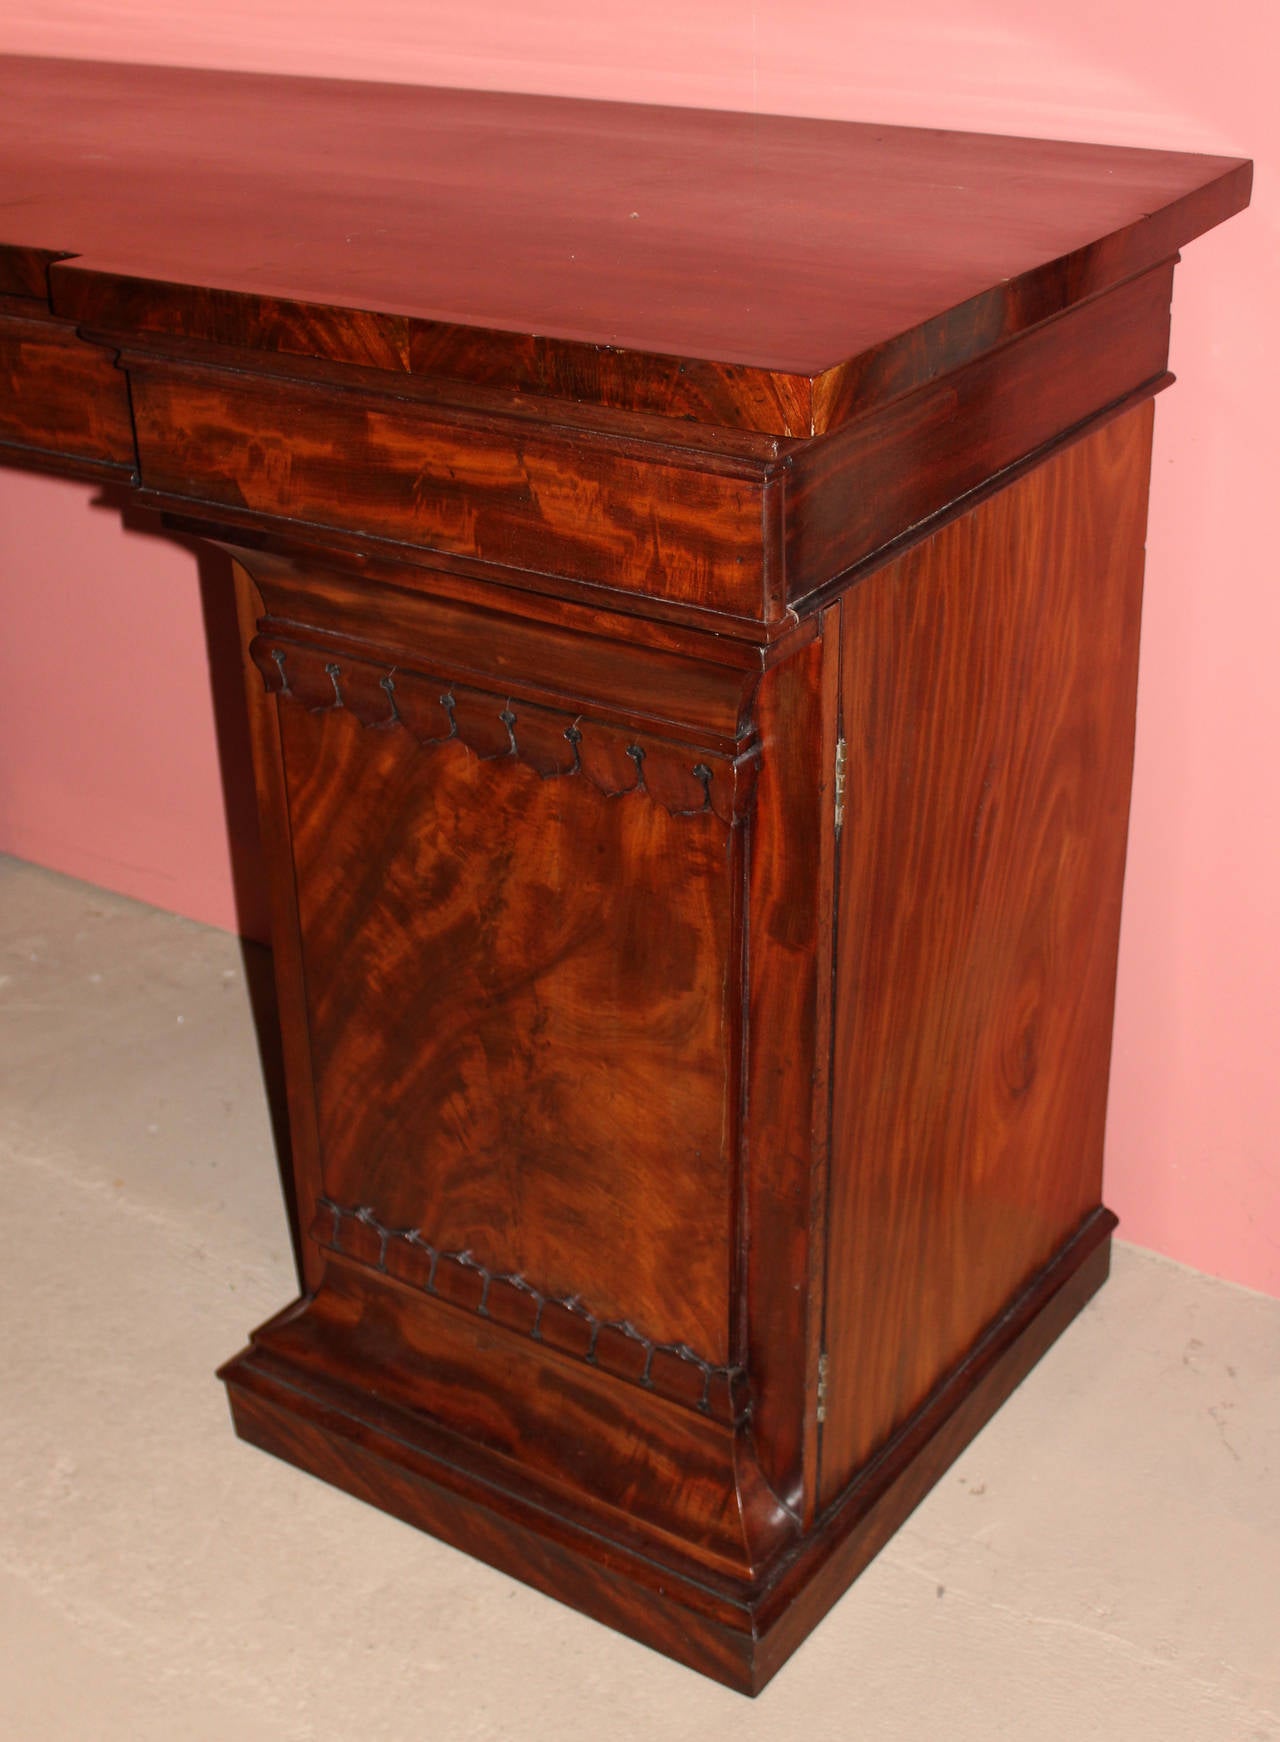 Classical Mahogany Pedestal Sideboard Attributed to Vose, Boston In Excellent Condition For Sale In Milford, NH